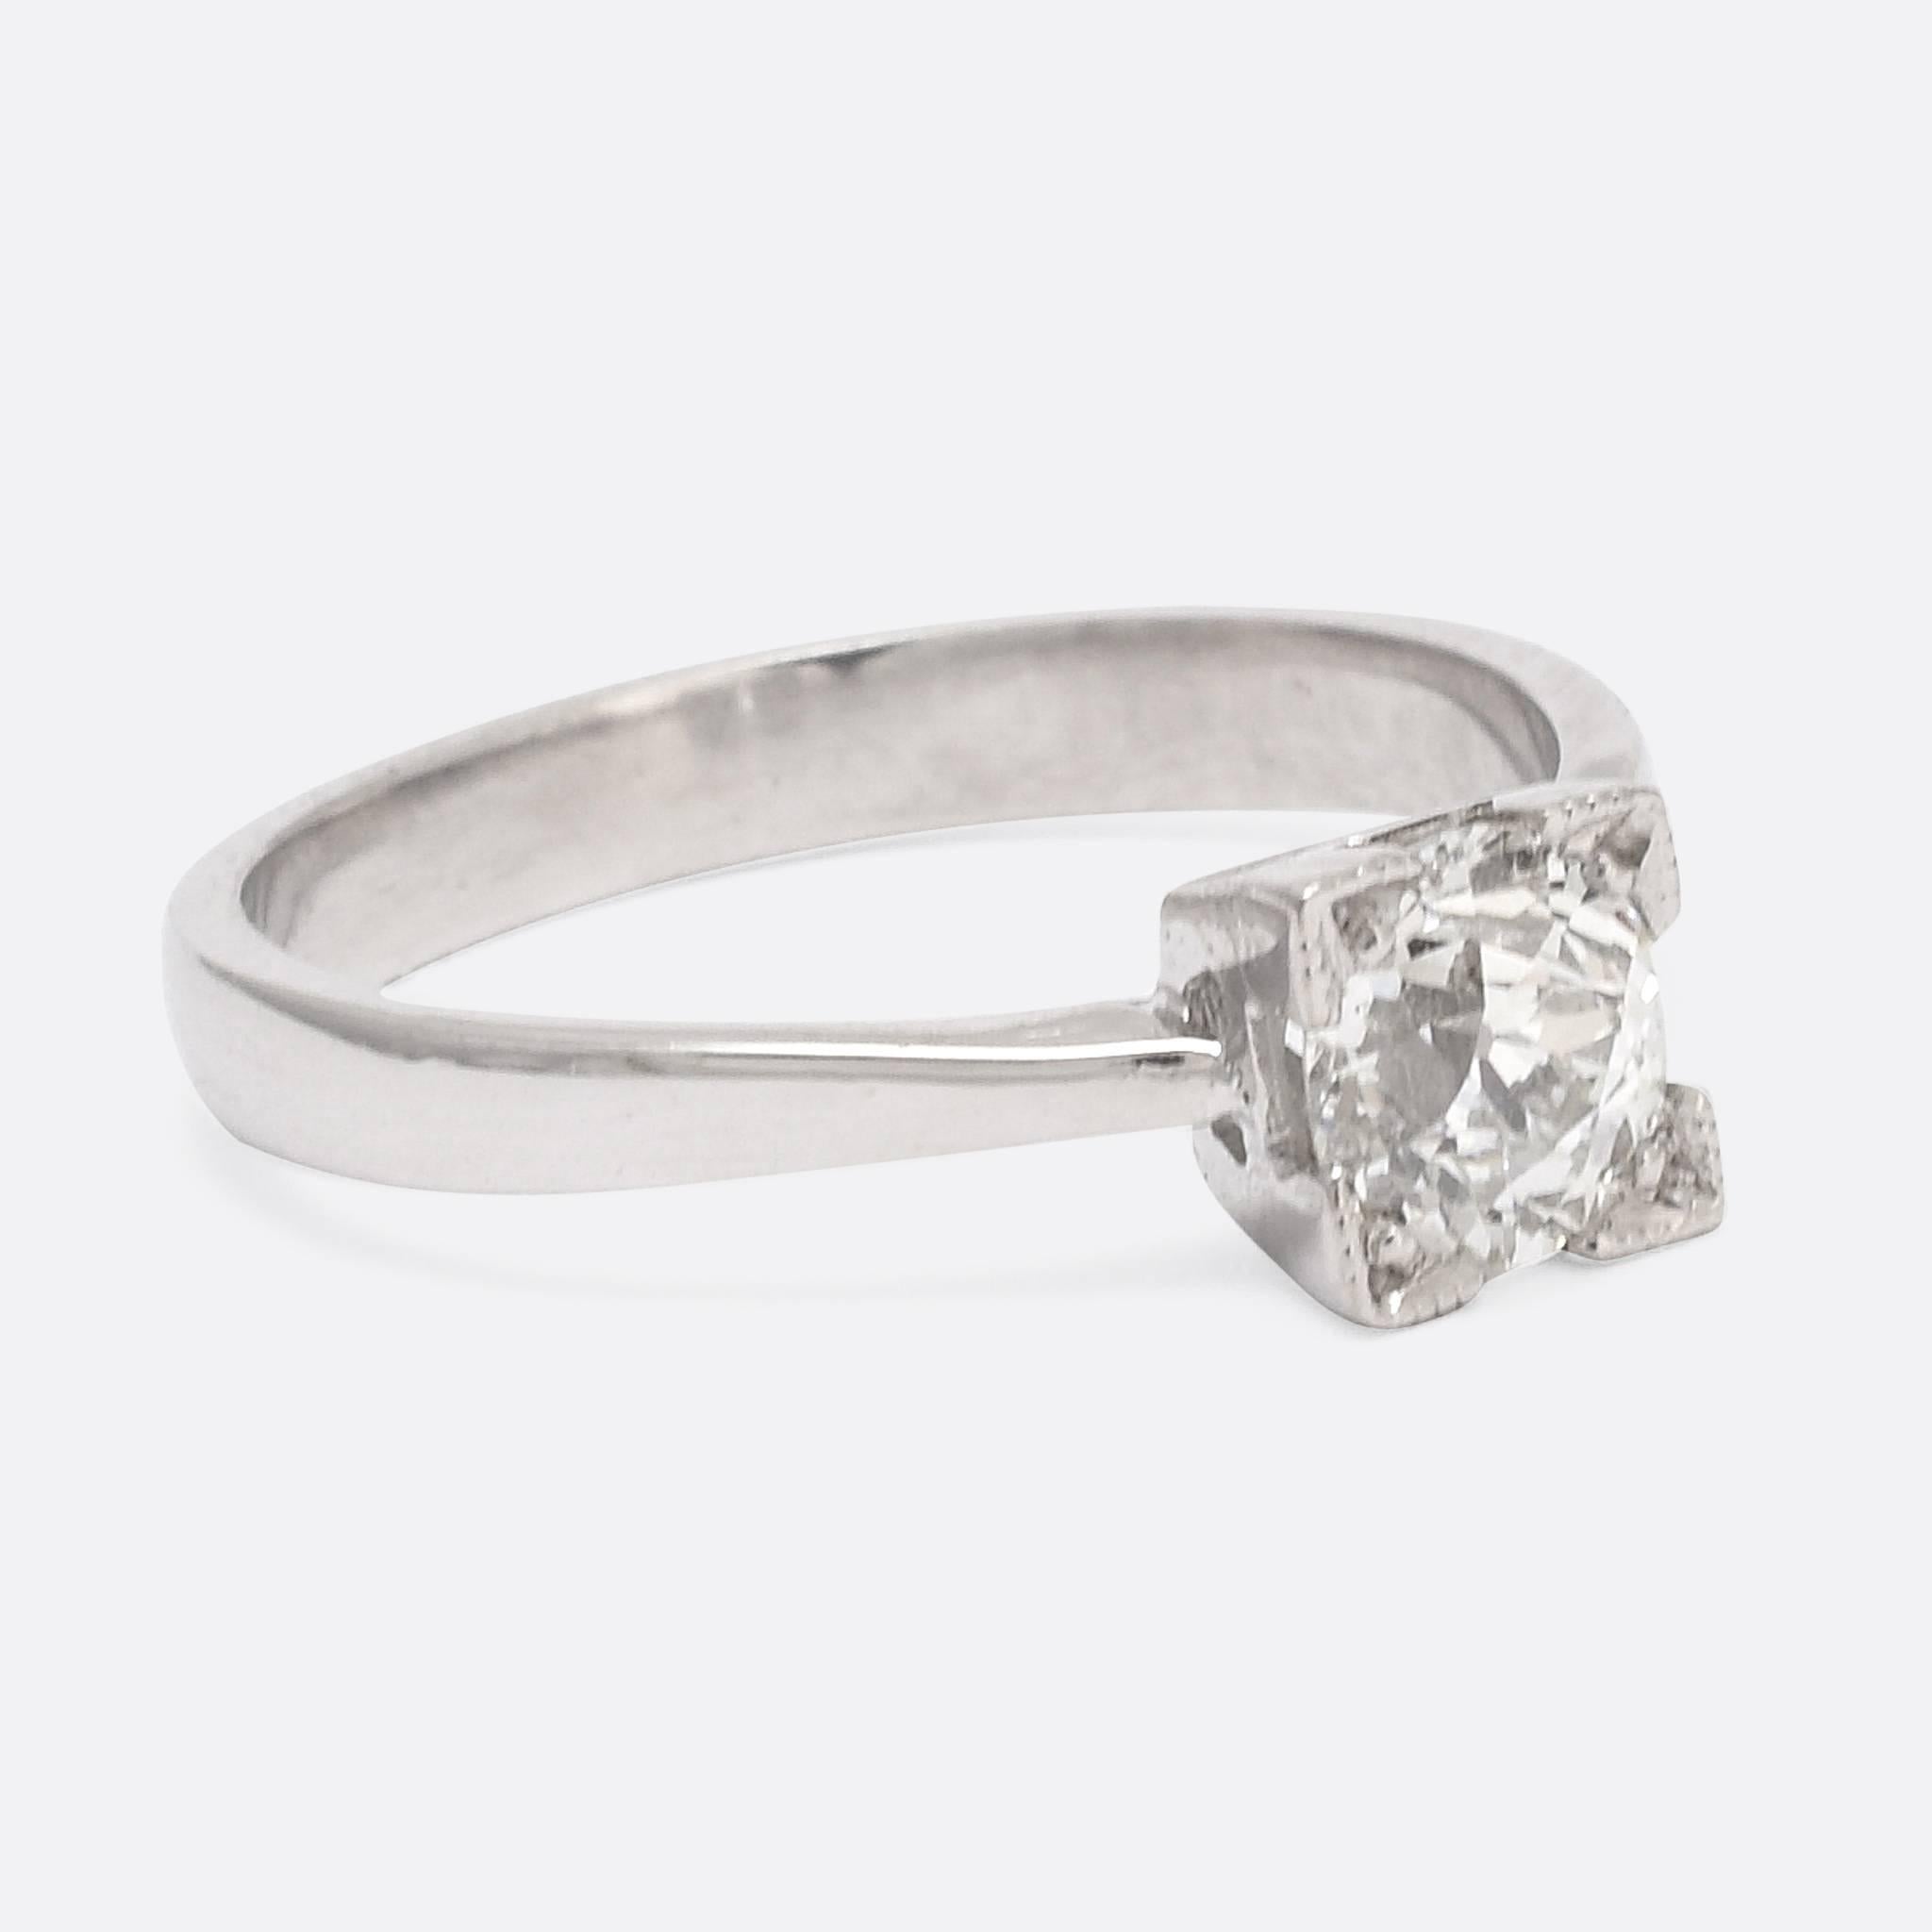 We have set an antique old European cut diamond in a contemporary ring mount of our own design. The beautiful .66ct stone is GIA certified - VS1 Clarity and J Colour - held in a square four-claw setting with millegrain detail, that takes inspiration